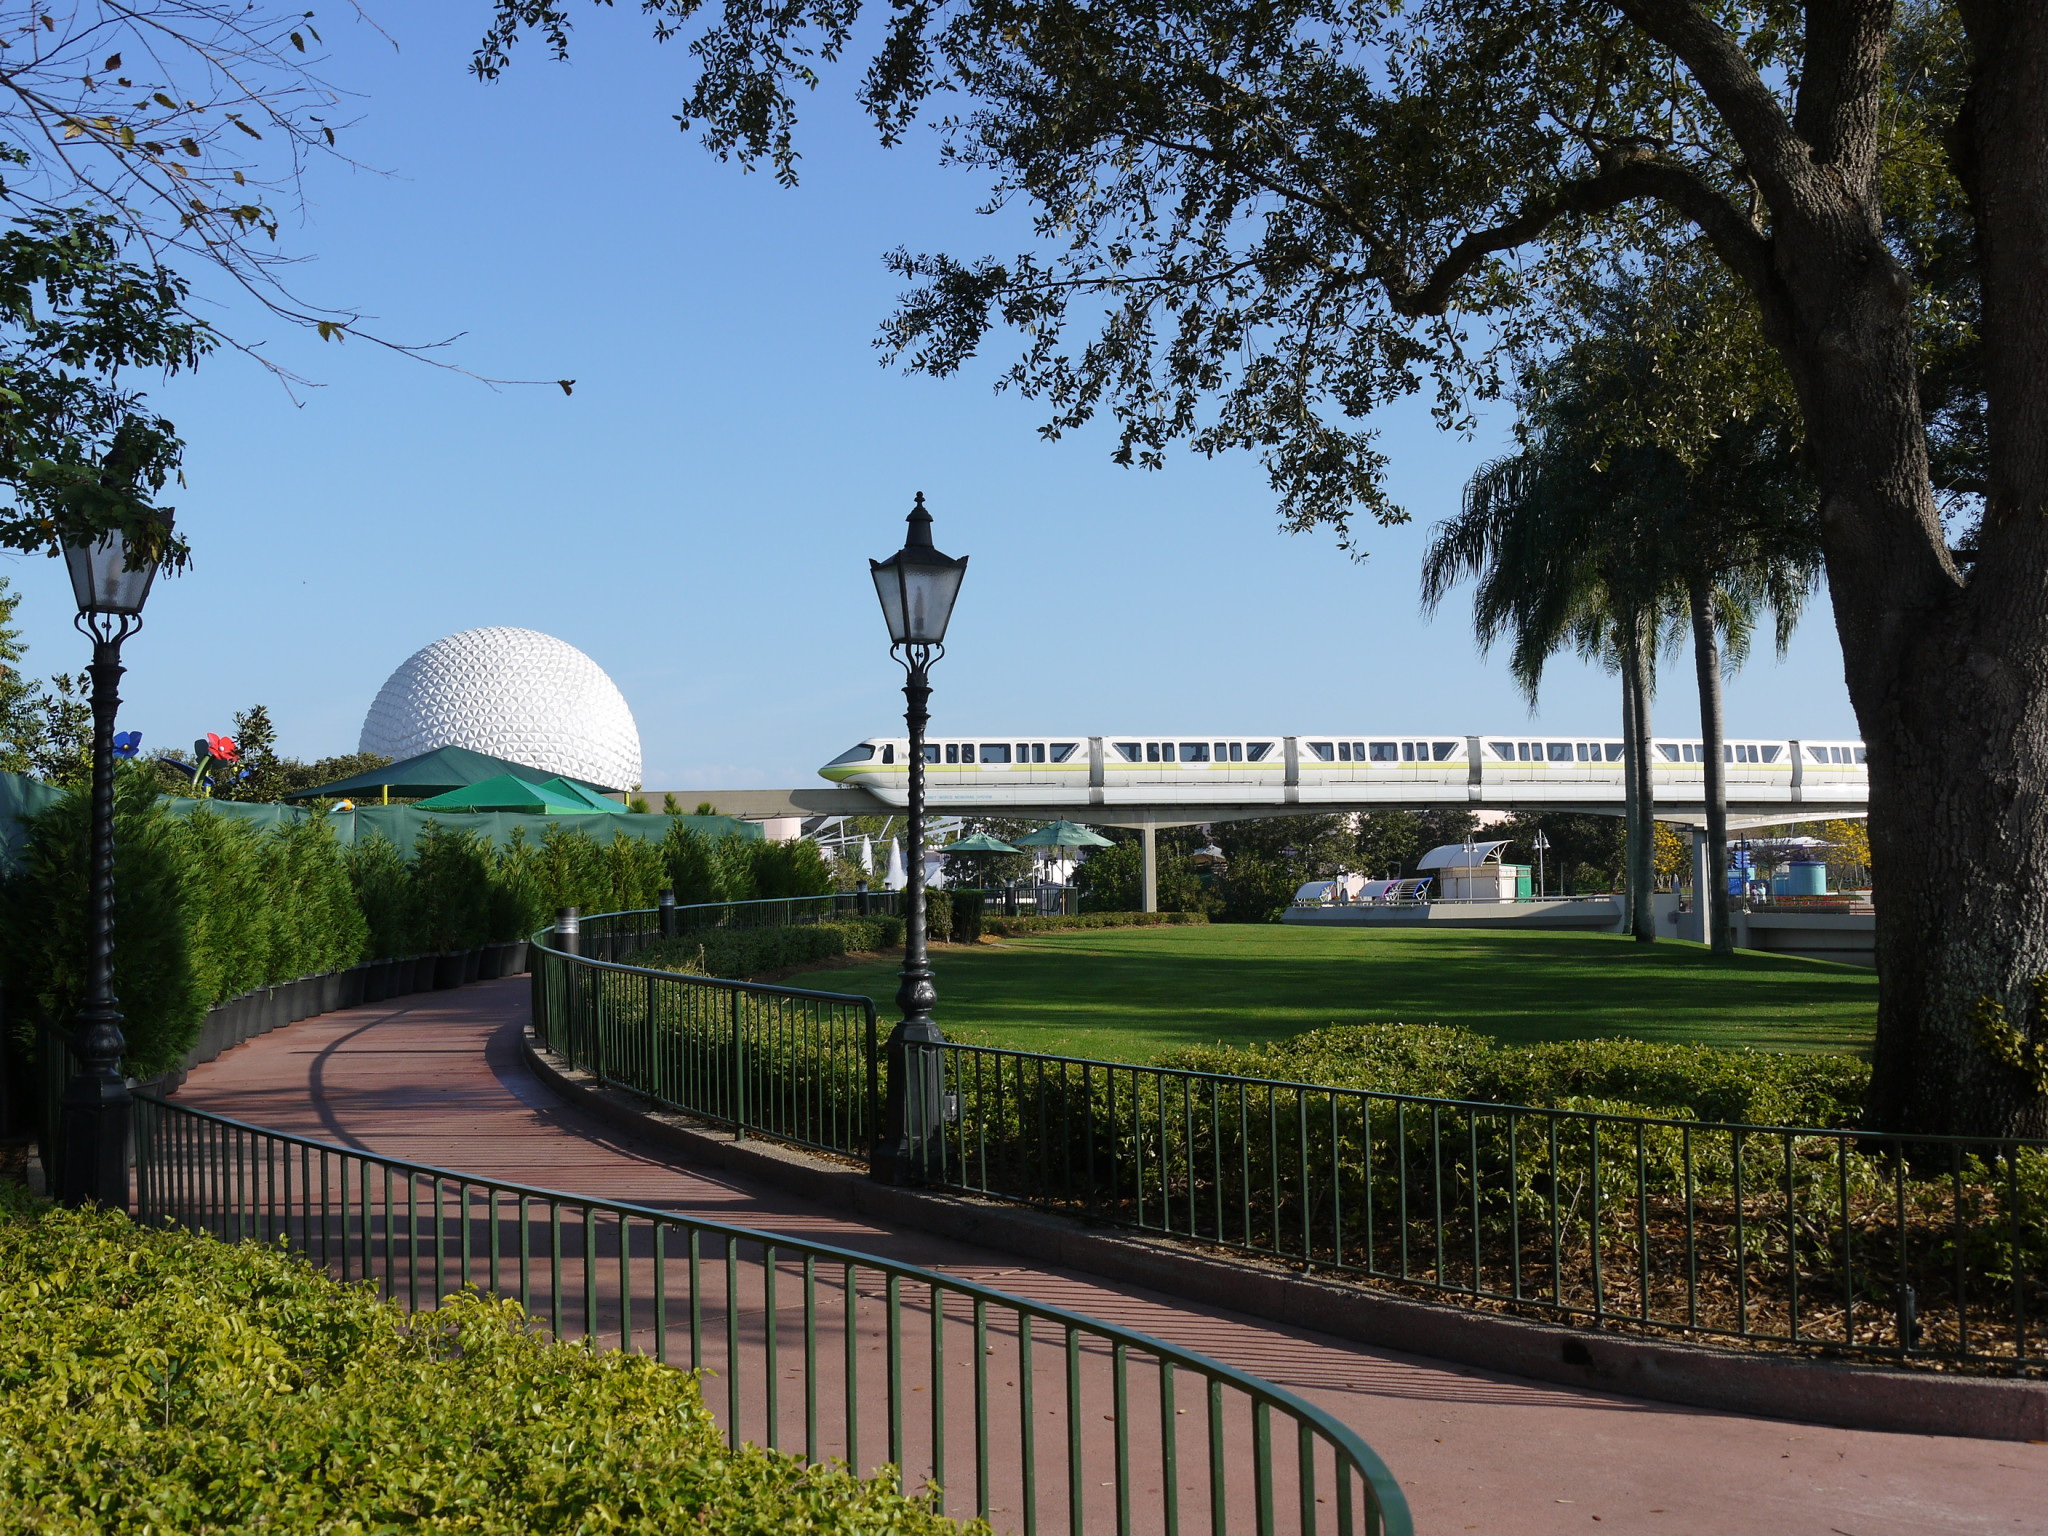 Permits Recently Filed Signal Epcot Expansion